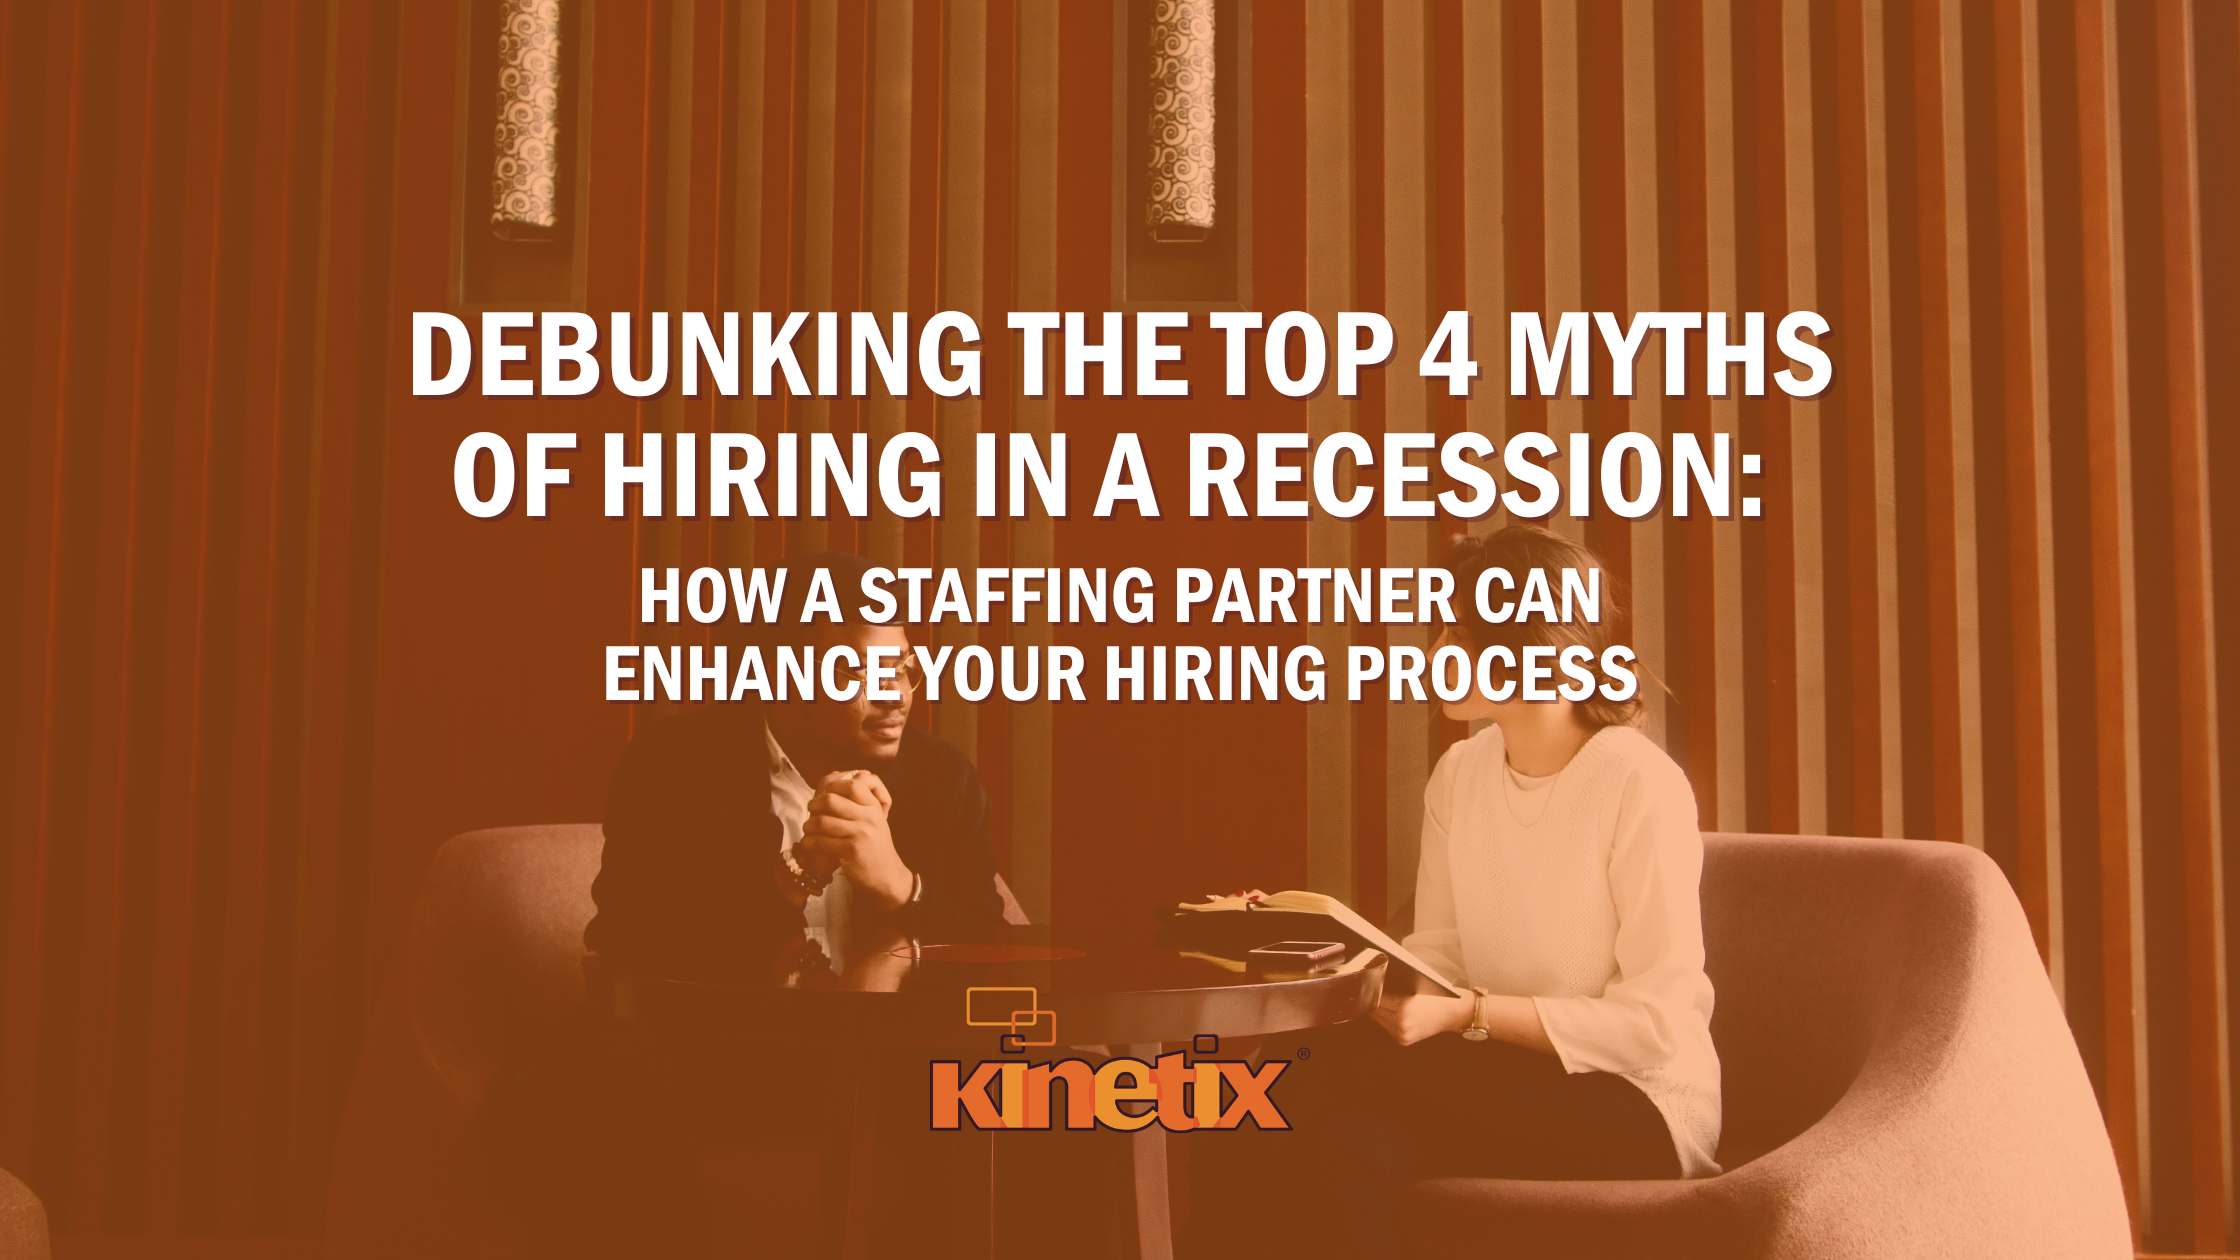 Debunking the Top 4 Myths of Hiring in a Recession